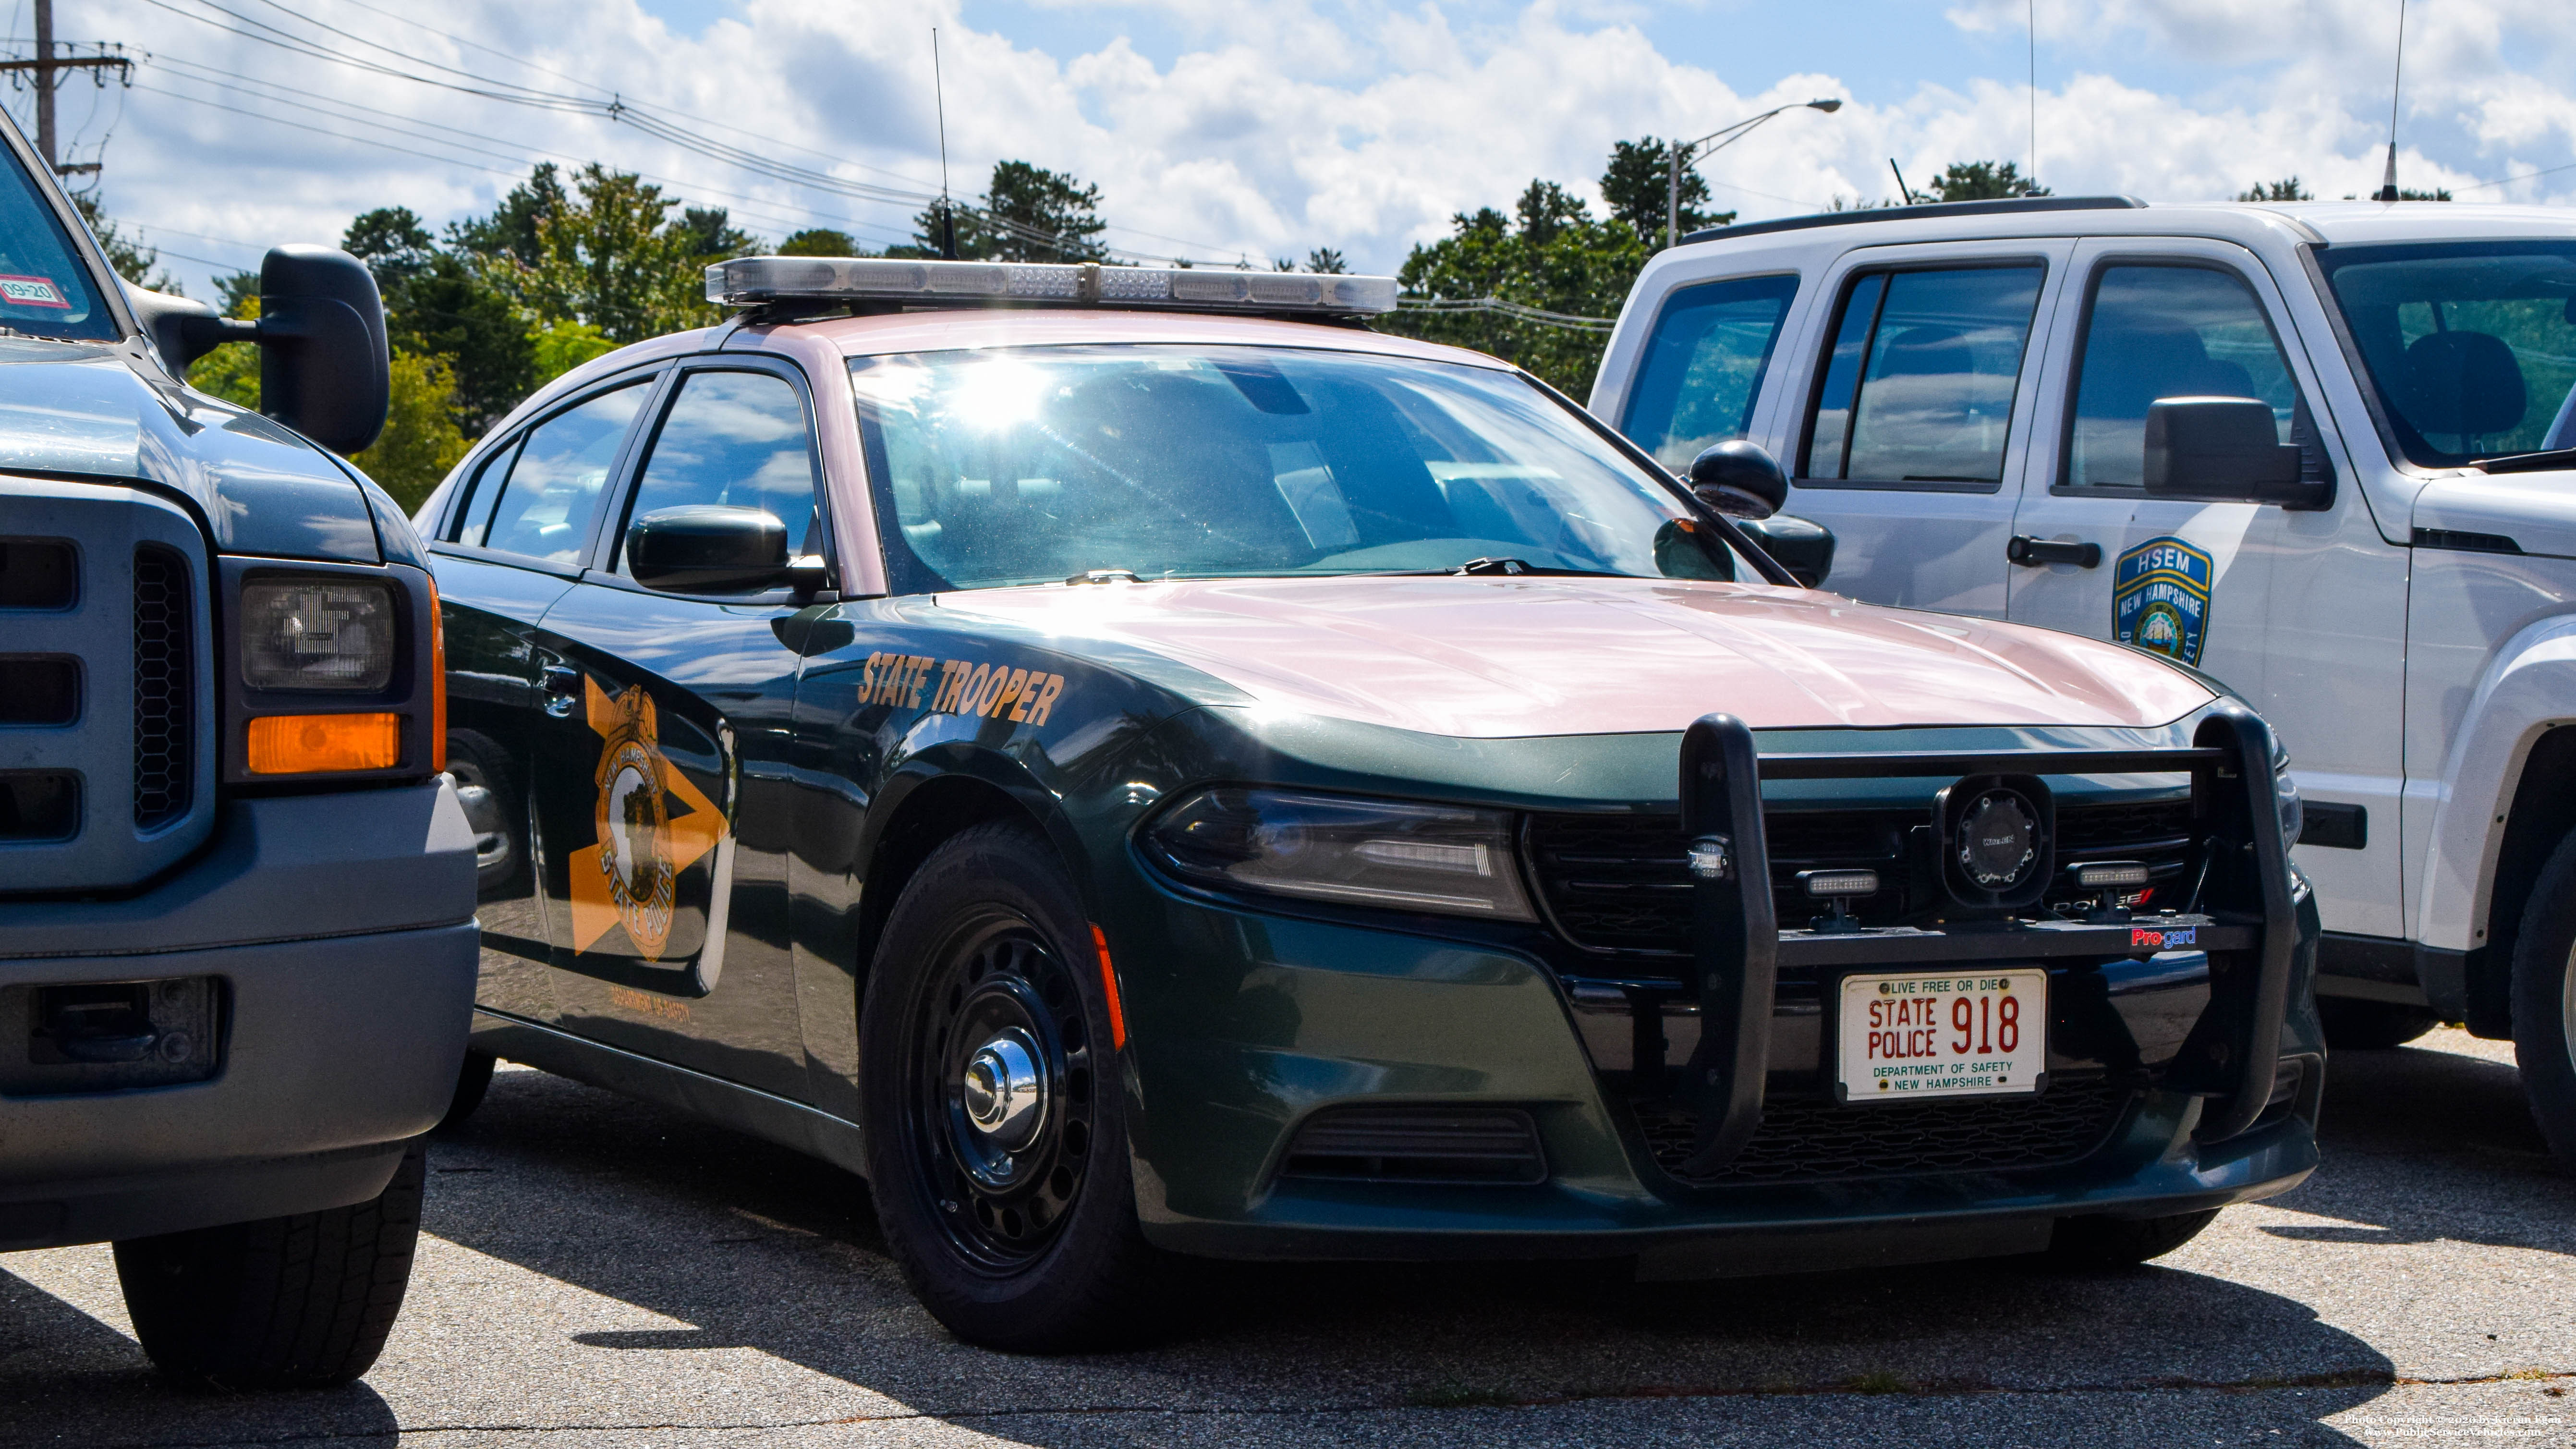 A photo  of New Hampshire State Police
            Cruiser 918, a 2015-2019 Dodge Charger             taken by Kieran Egan